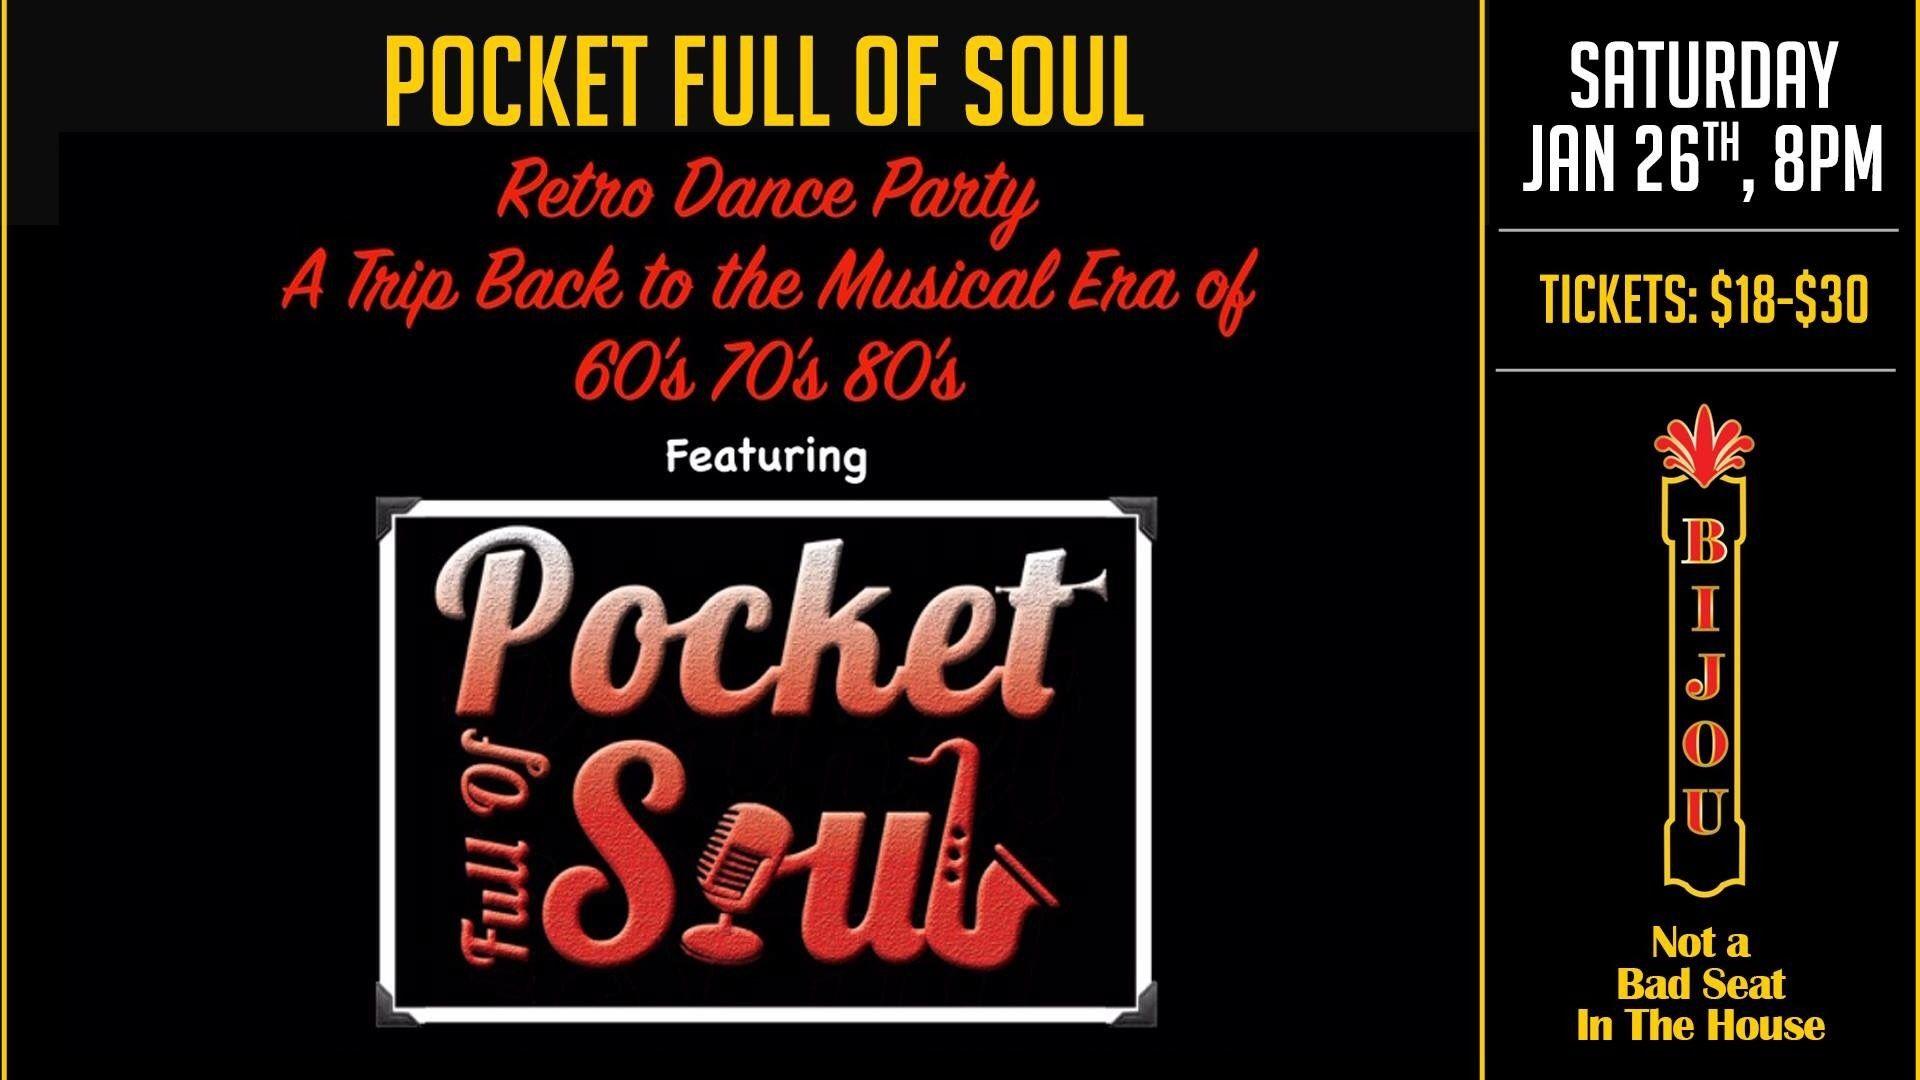 Pocket Full Of Soul Tribute To The Horn Driven Bands Of The 60s